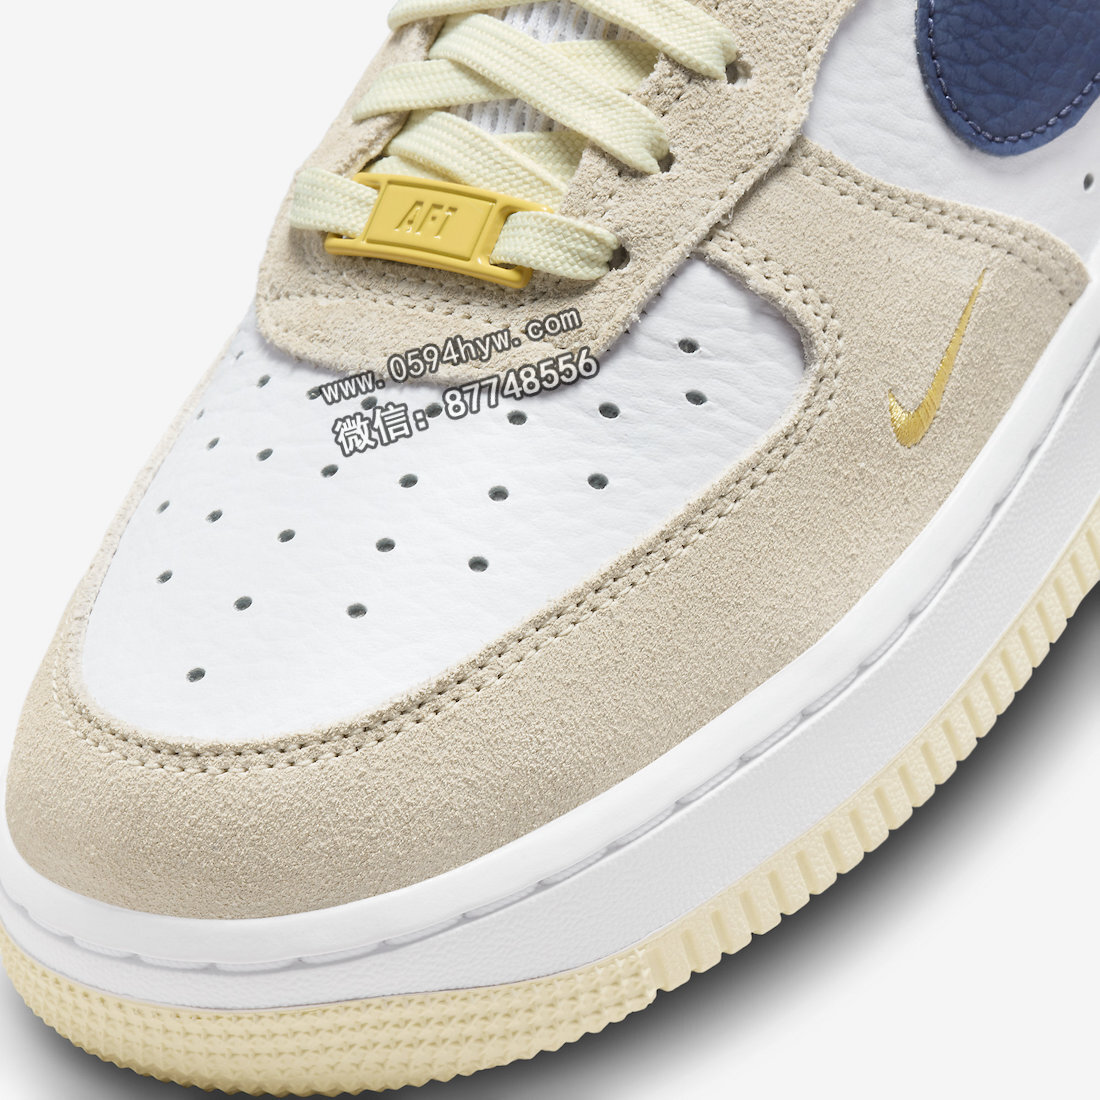 Nike-Air-Force-1-Low-White-Navy-Gold-FV6332-100-6-1